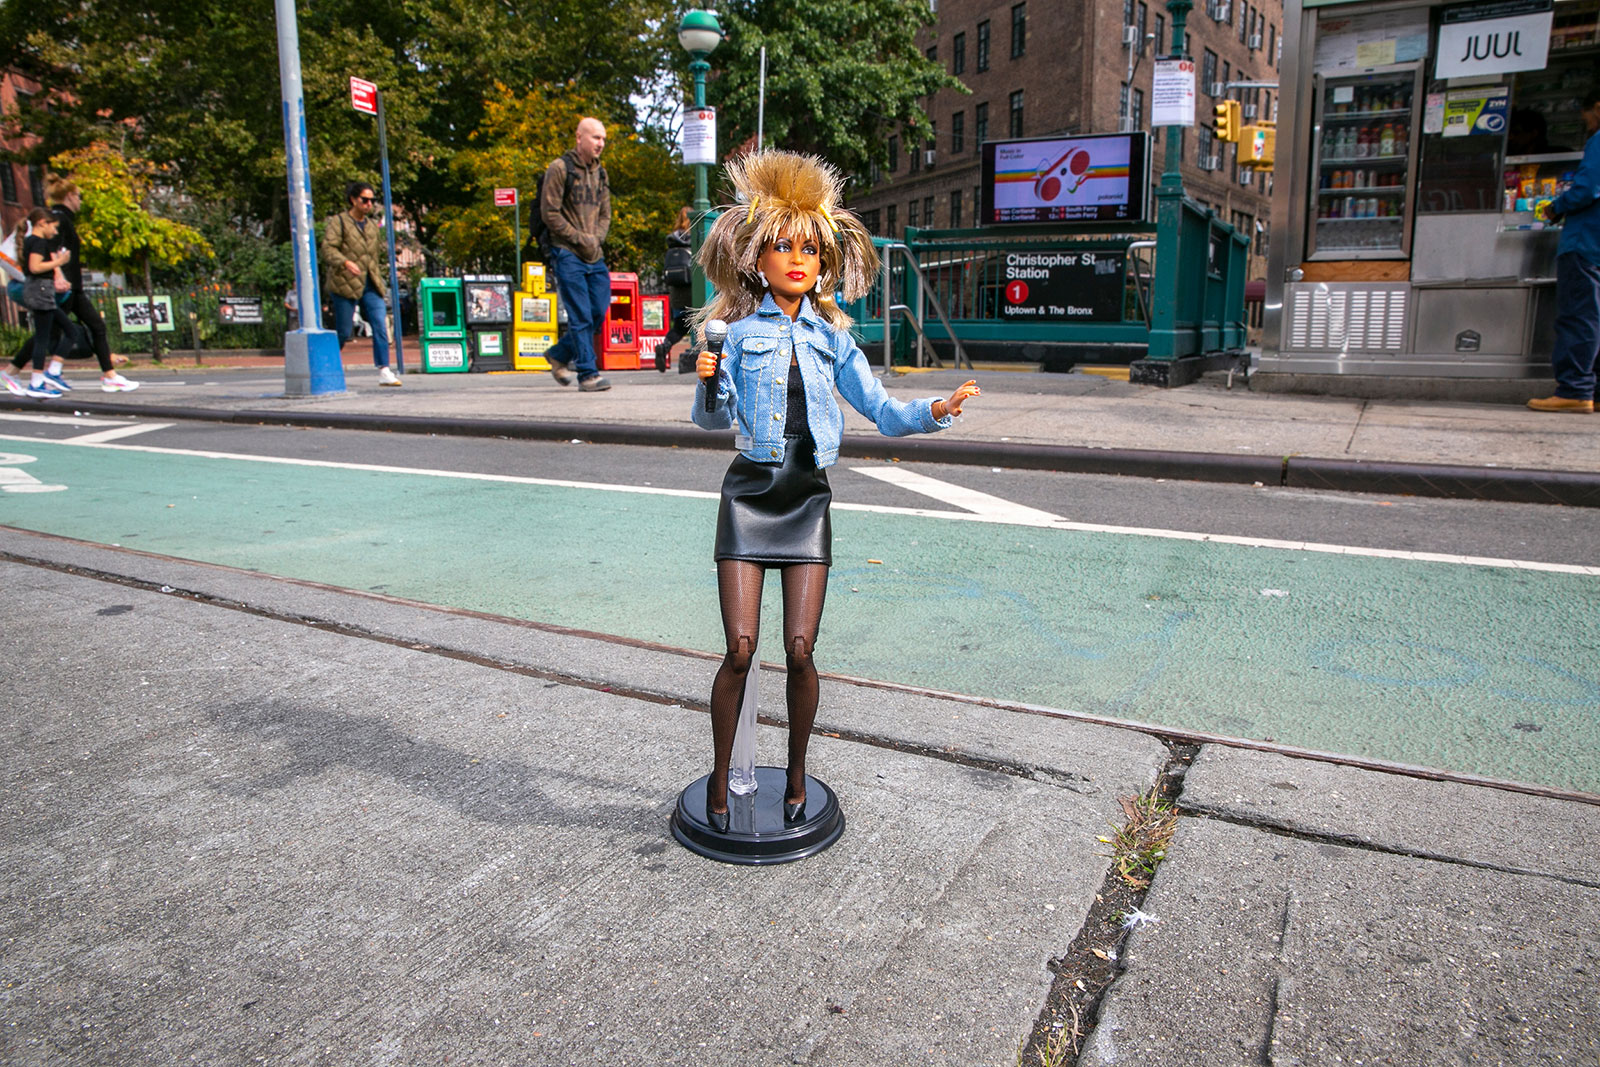 A Barbie doll in the likeness of musician Tina Turner is in front of the Christopher Street Station in Manhattan on October 17, 2022. 